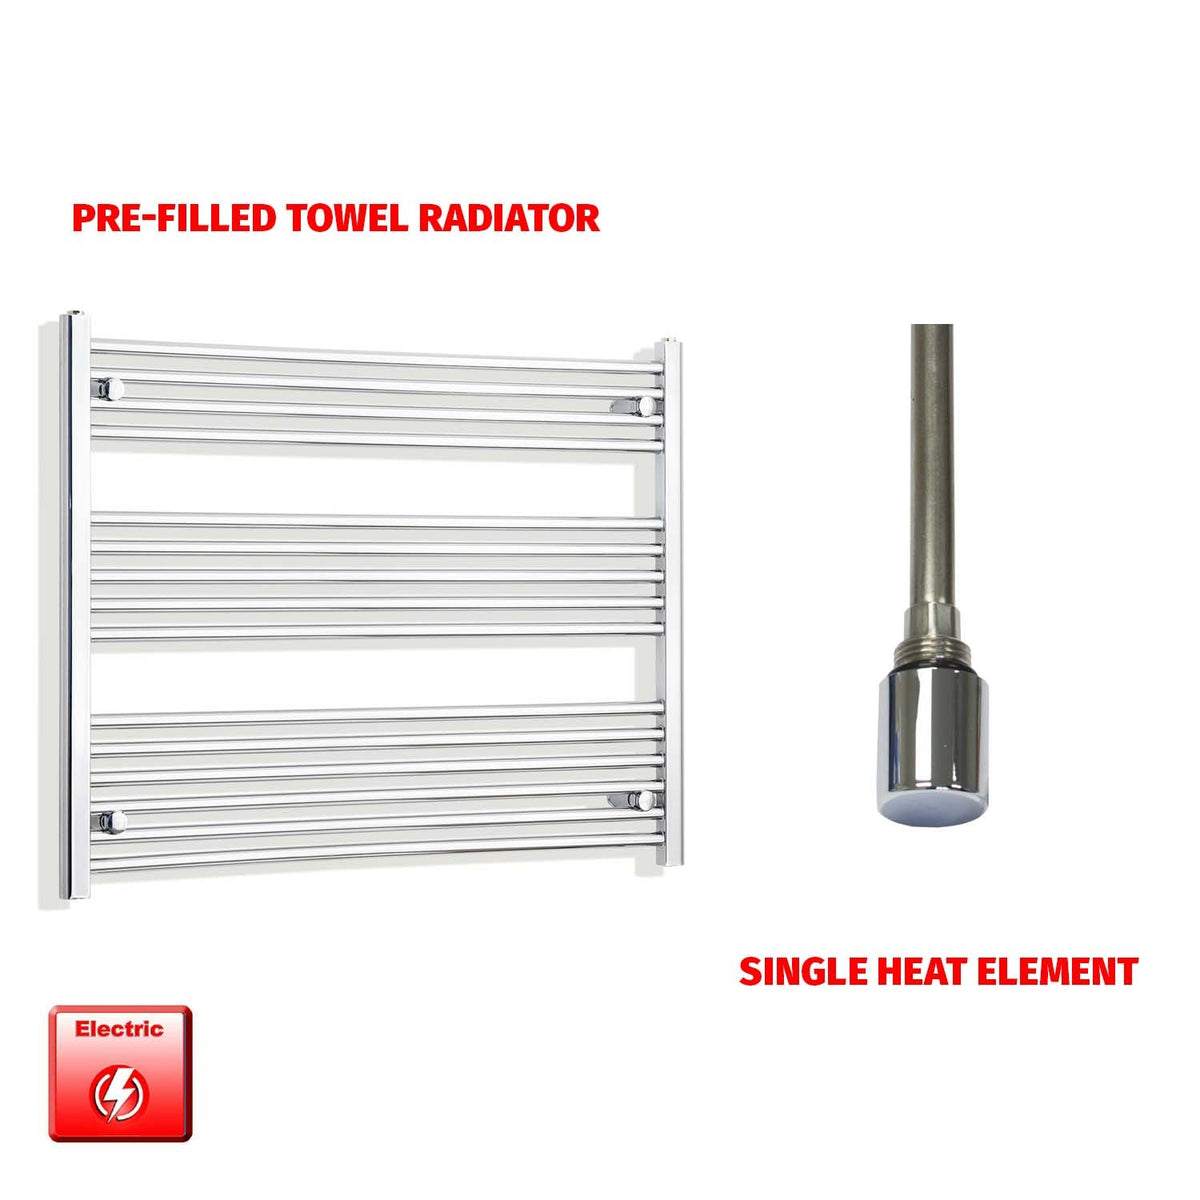 800mm High 950mm Wide Pre-Filled Electric Heated Towel Rail Radiator Straight Chrome Single heat element no timer